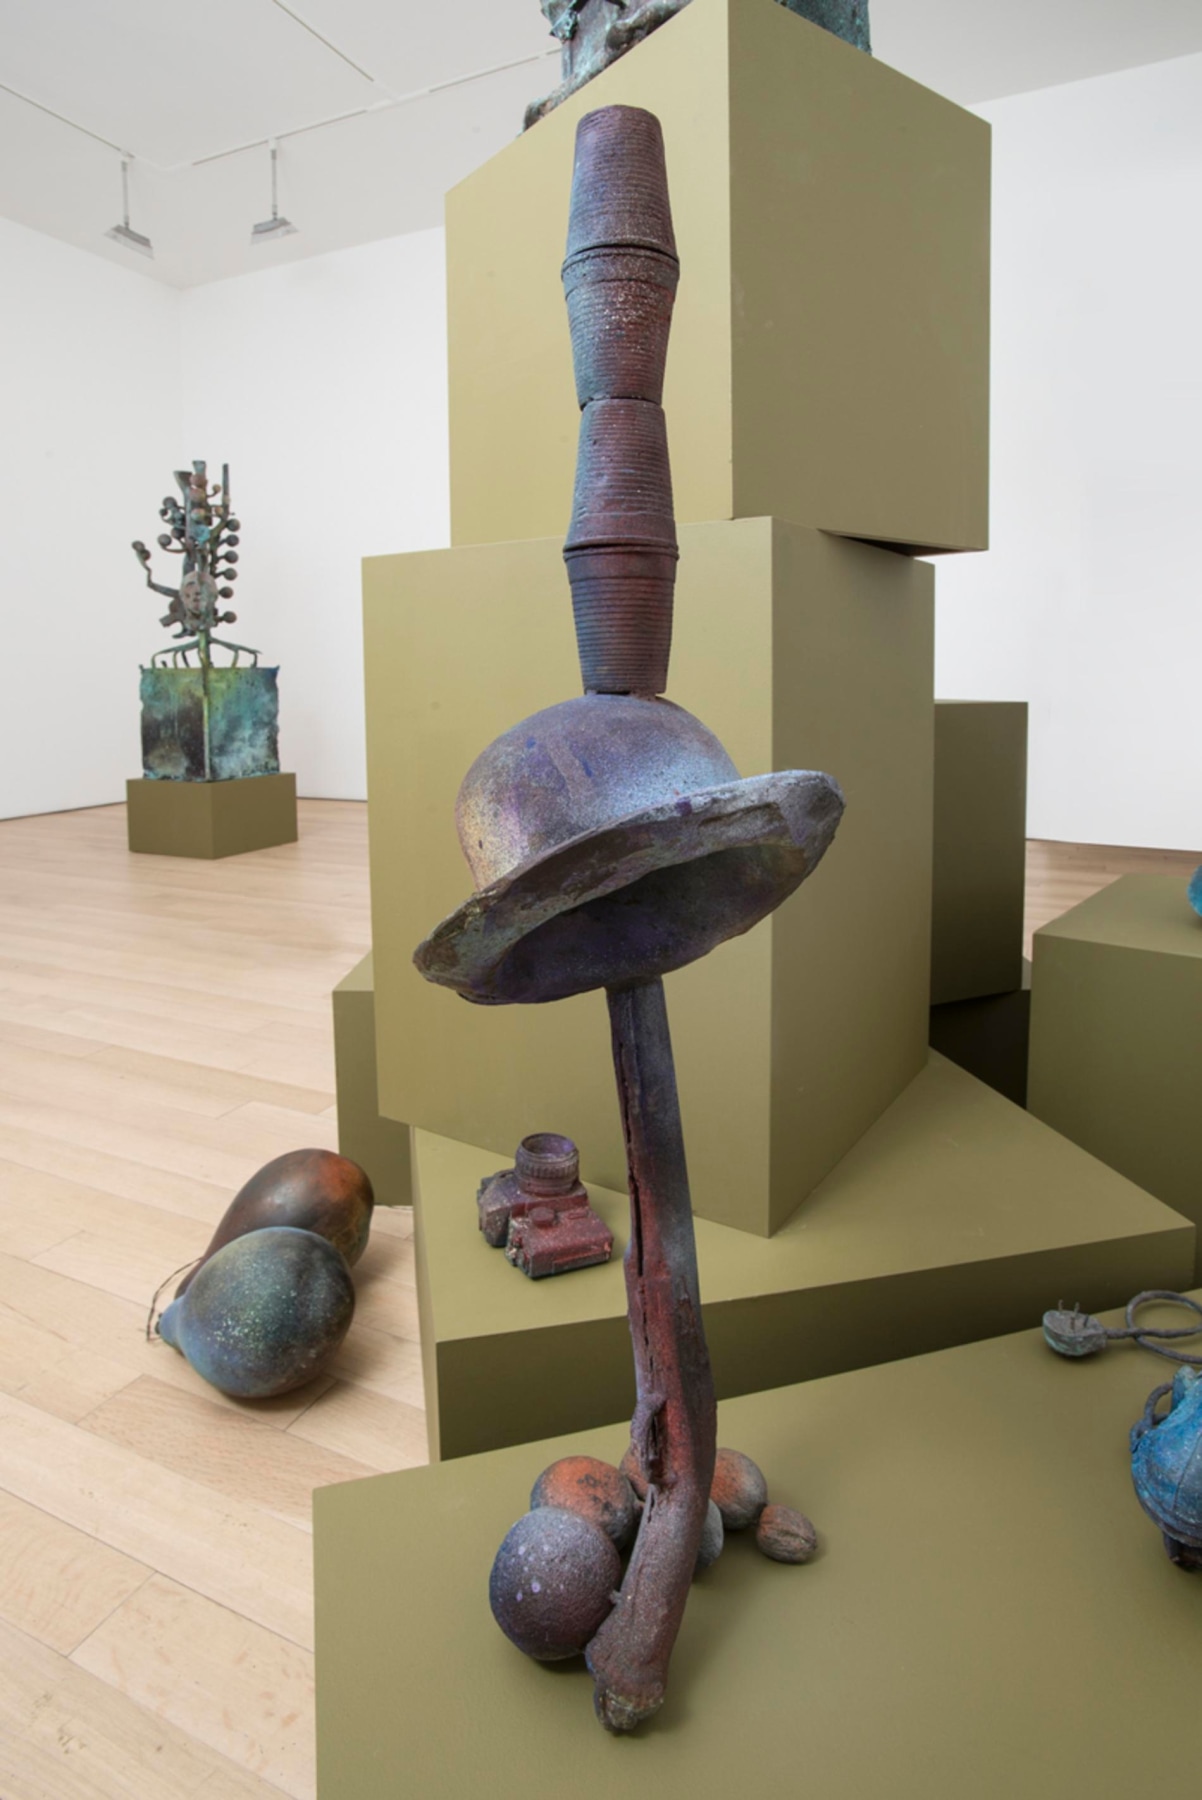 sculpture of a hat, musket, and cups balancing on each other